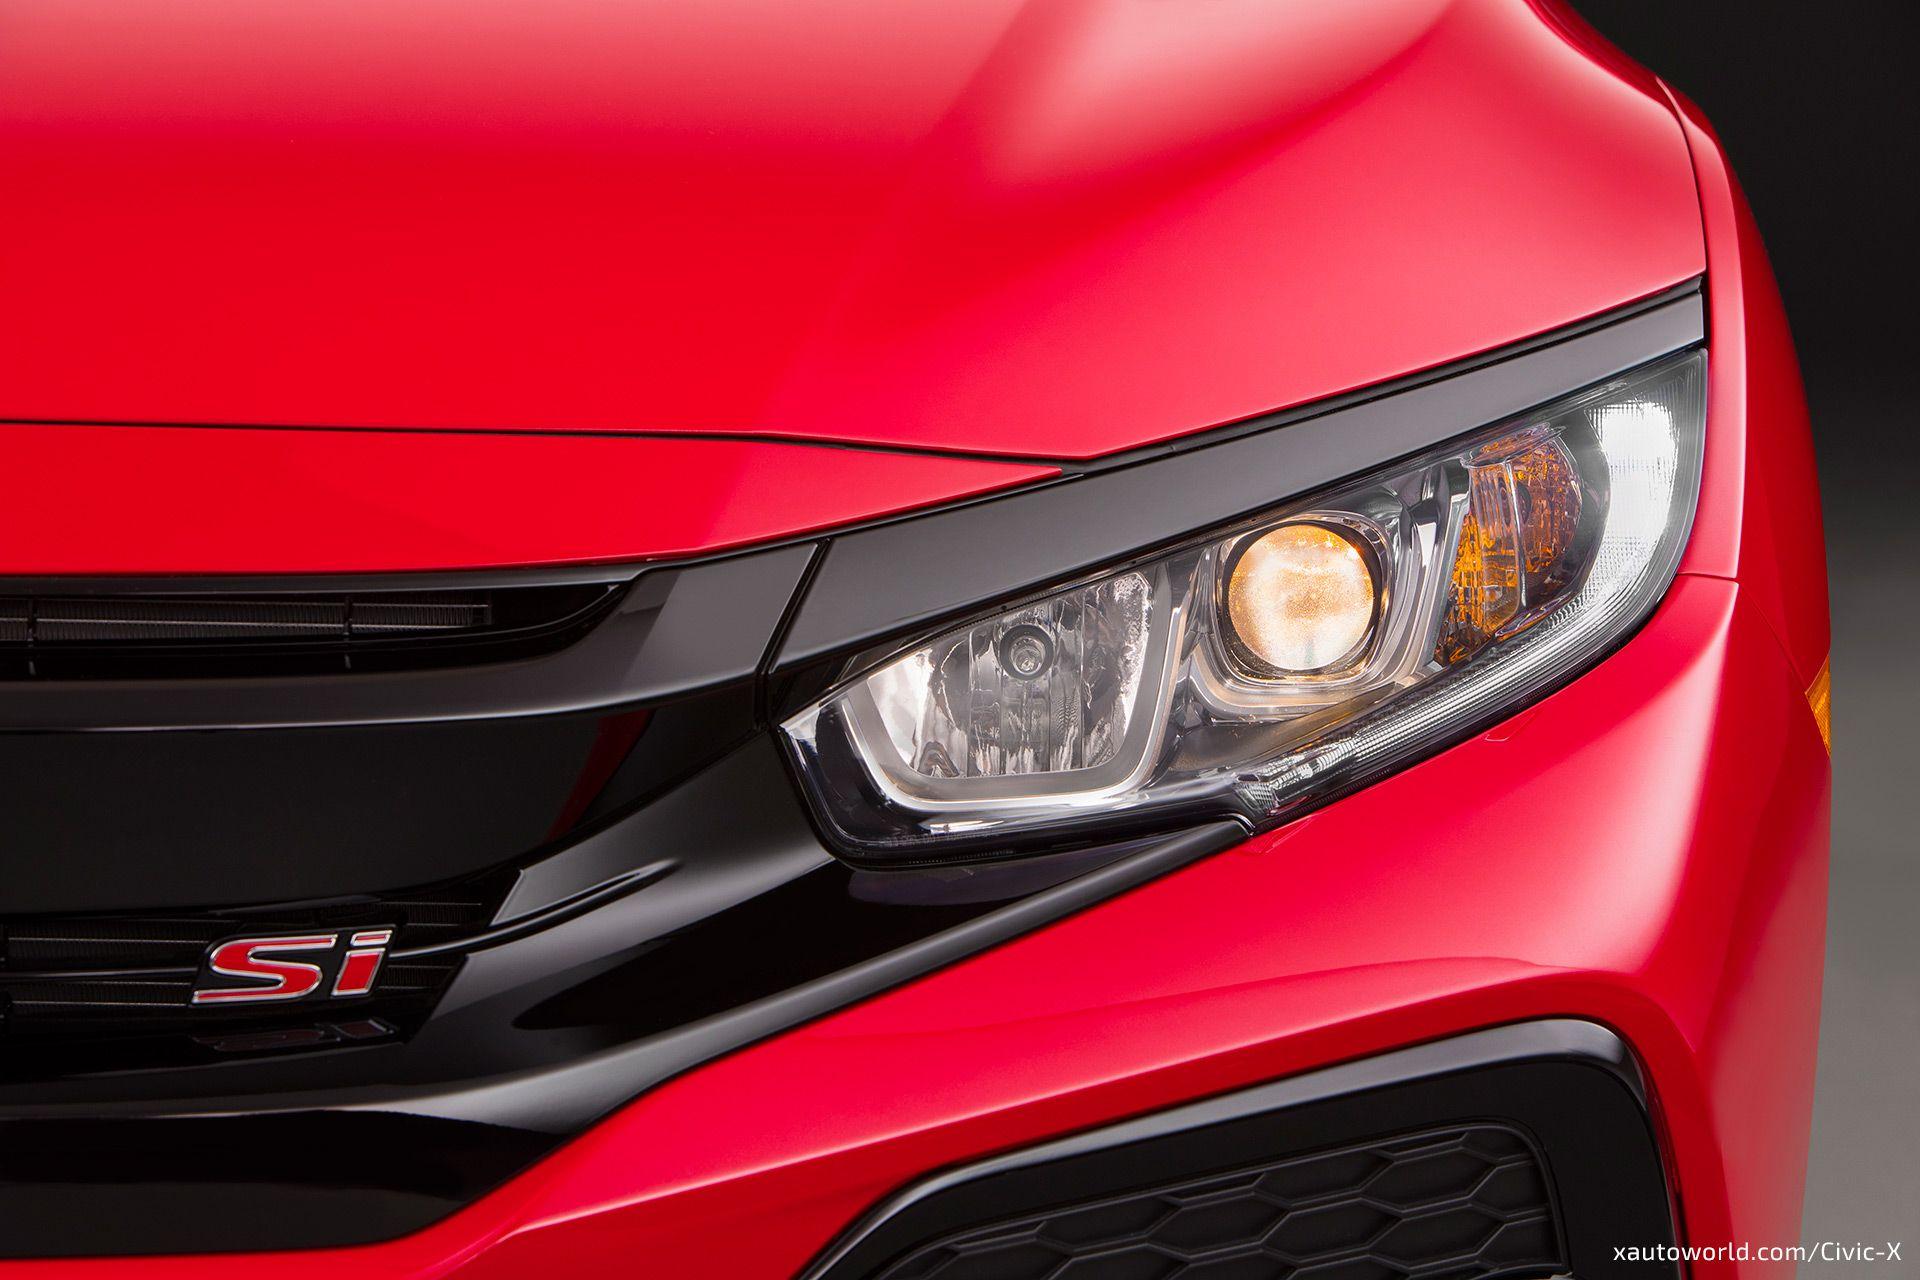 Honda Civic Si Logo - 2017 Civic Si Unveiled - Specs, Video And HD Photo Gallery